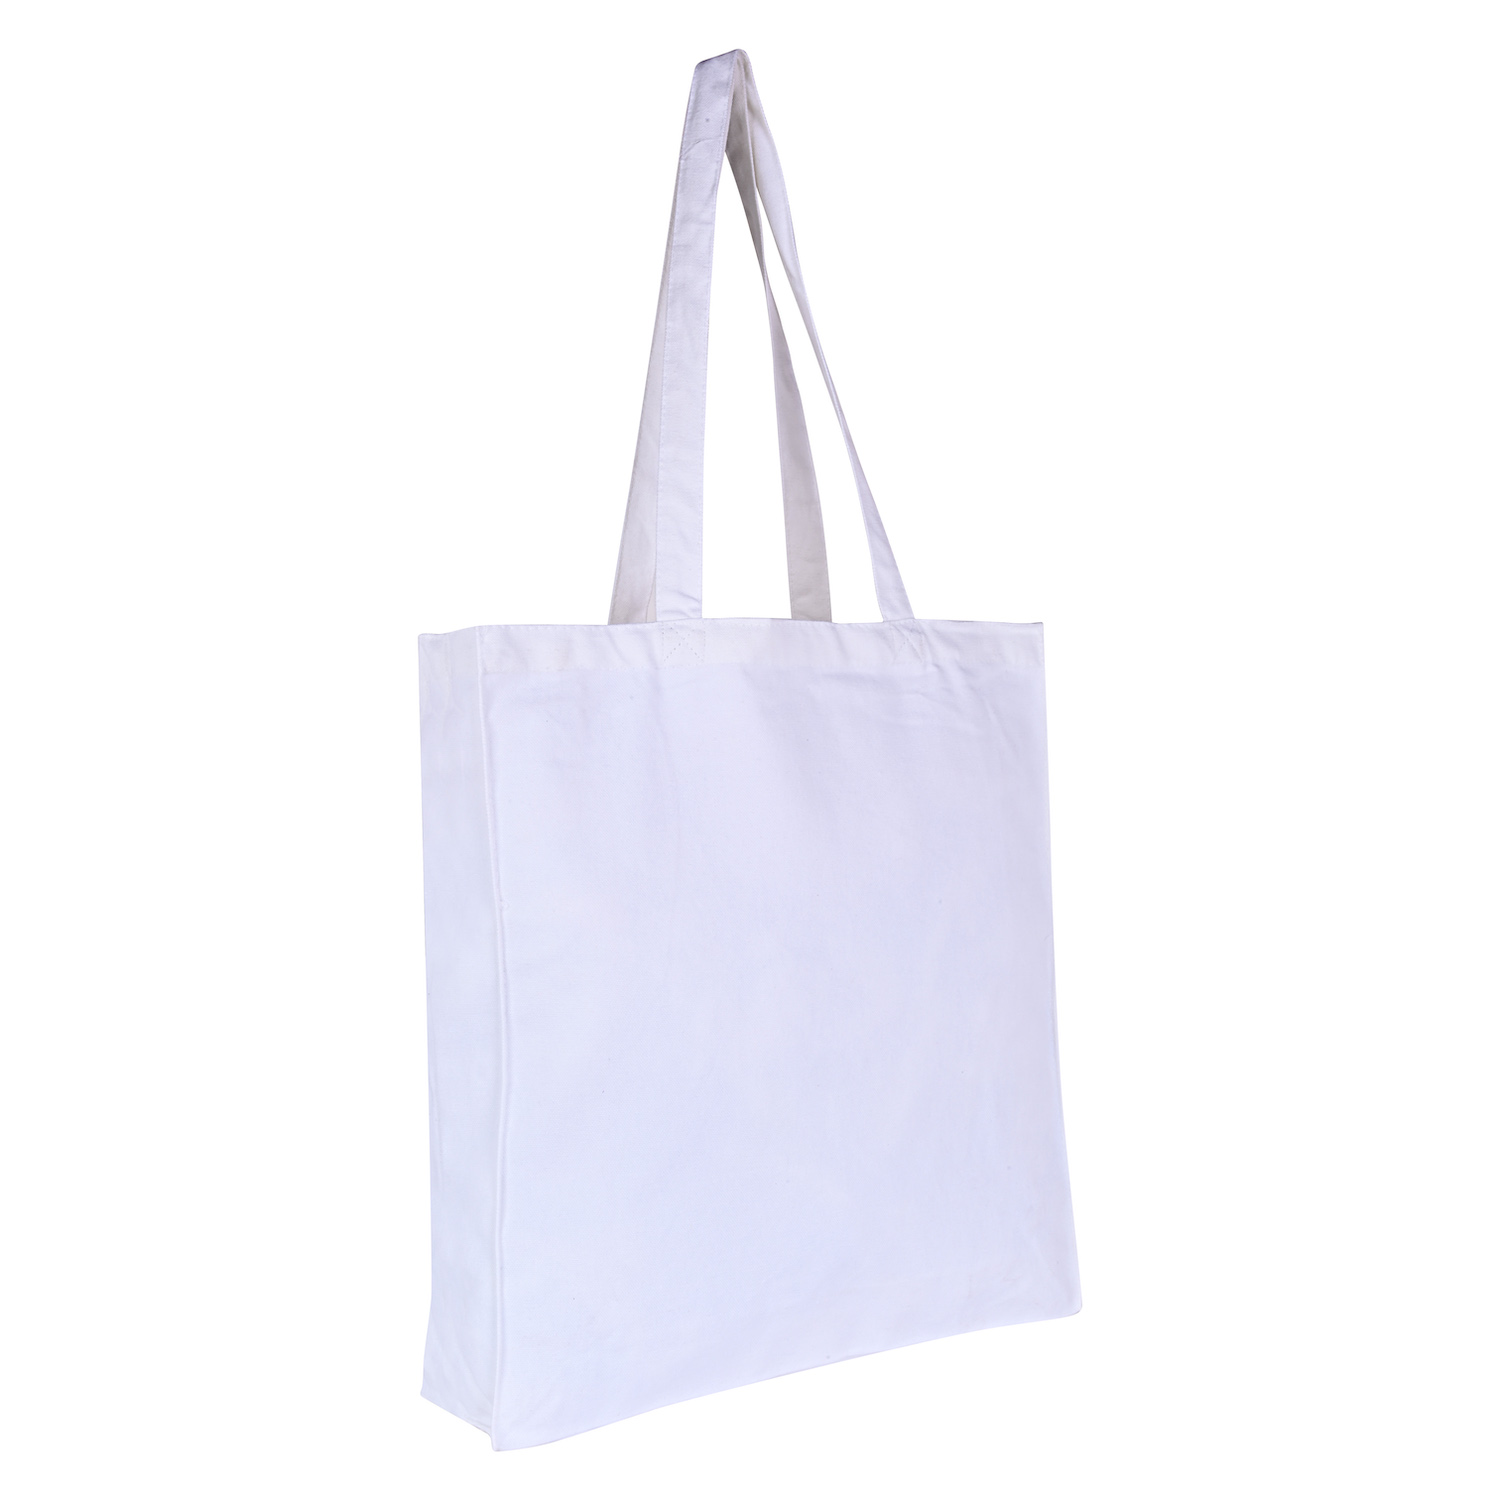 Gusset Tote Bag (10 Count) 14